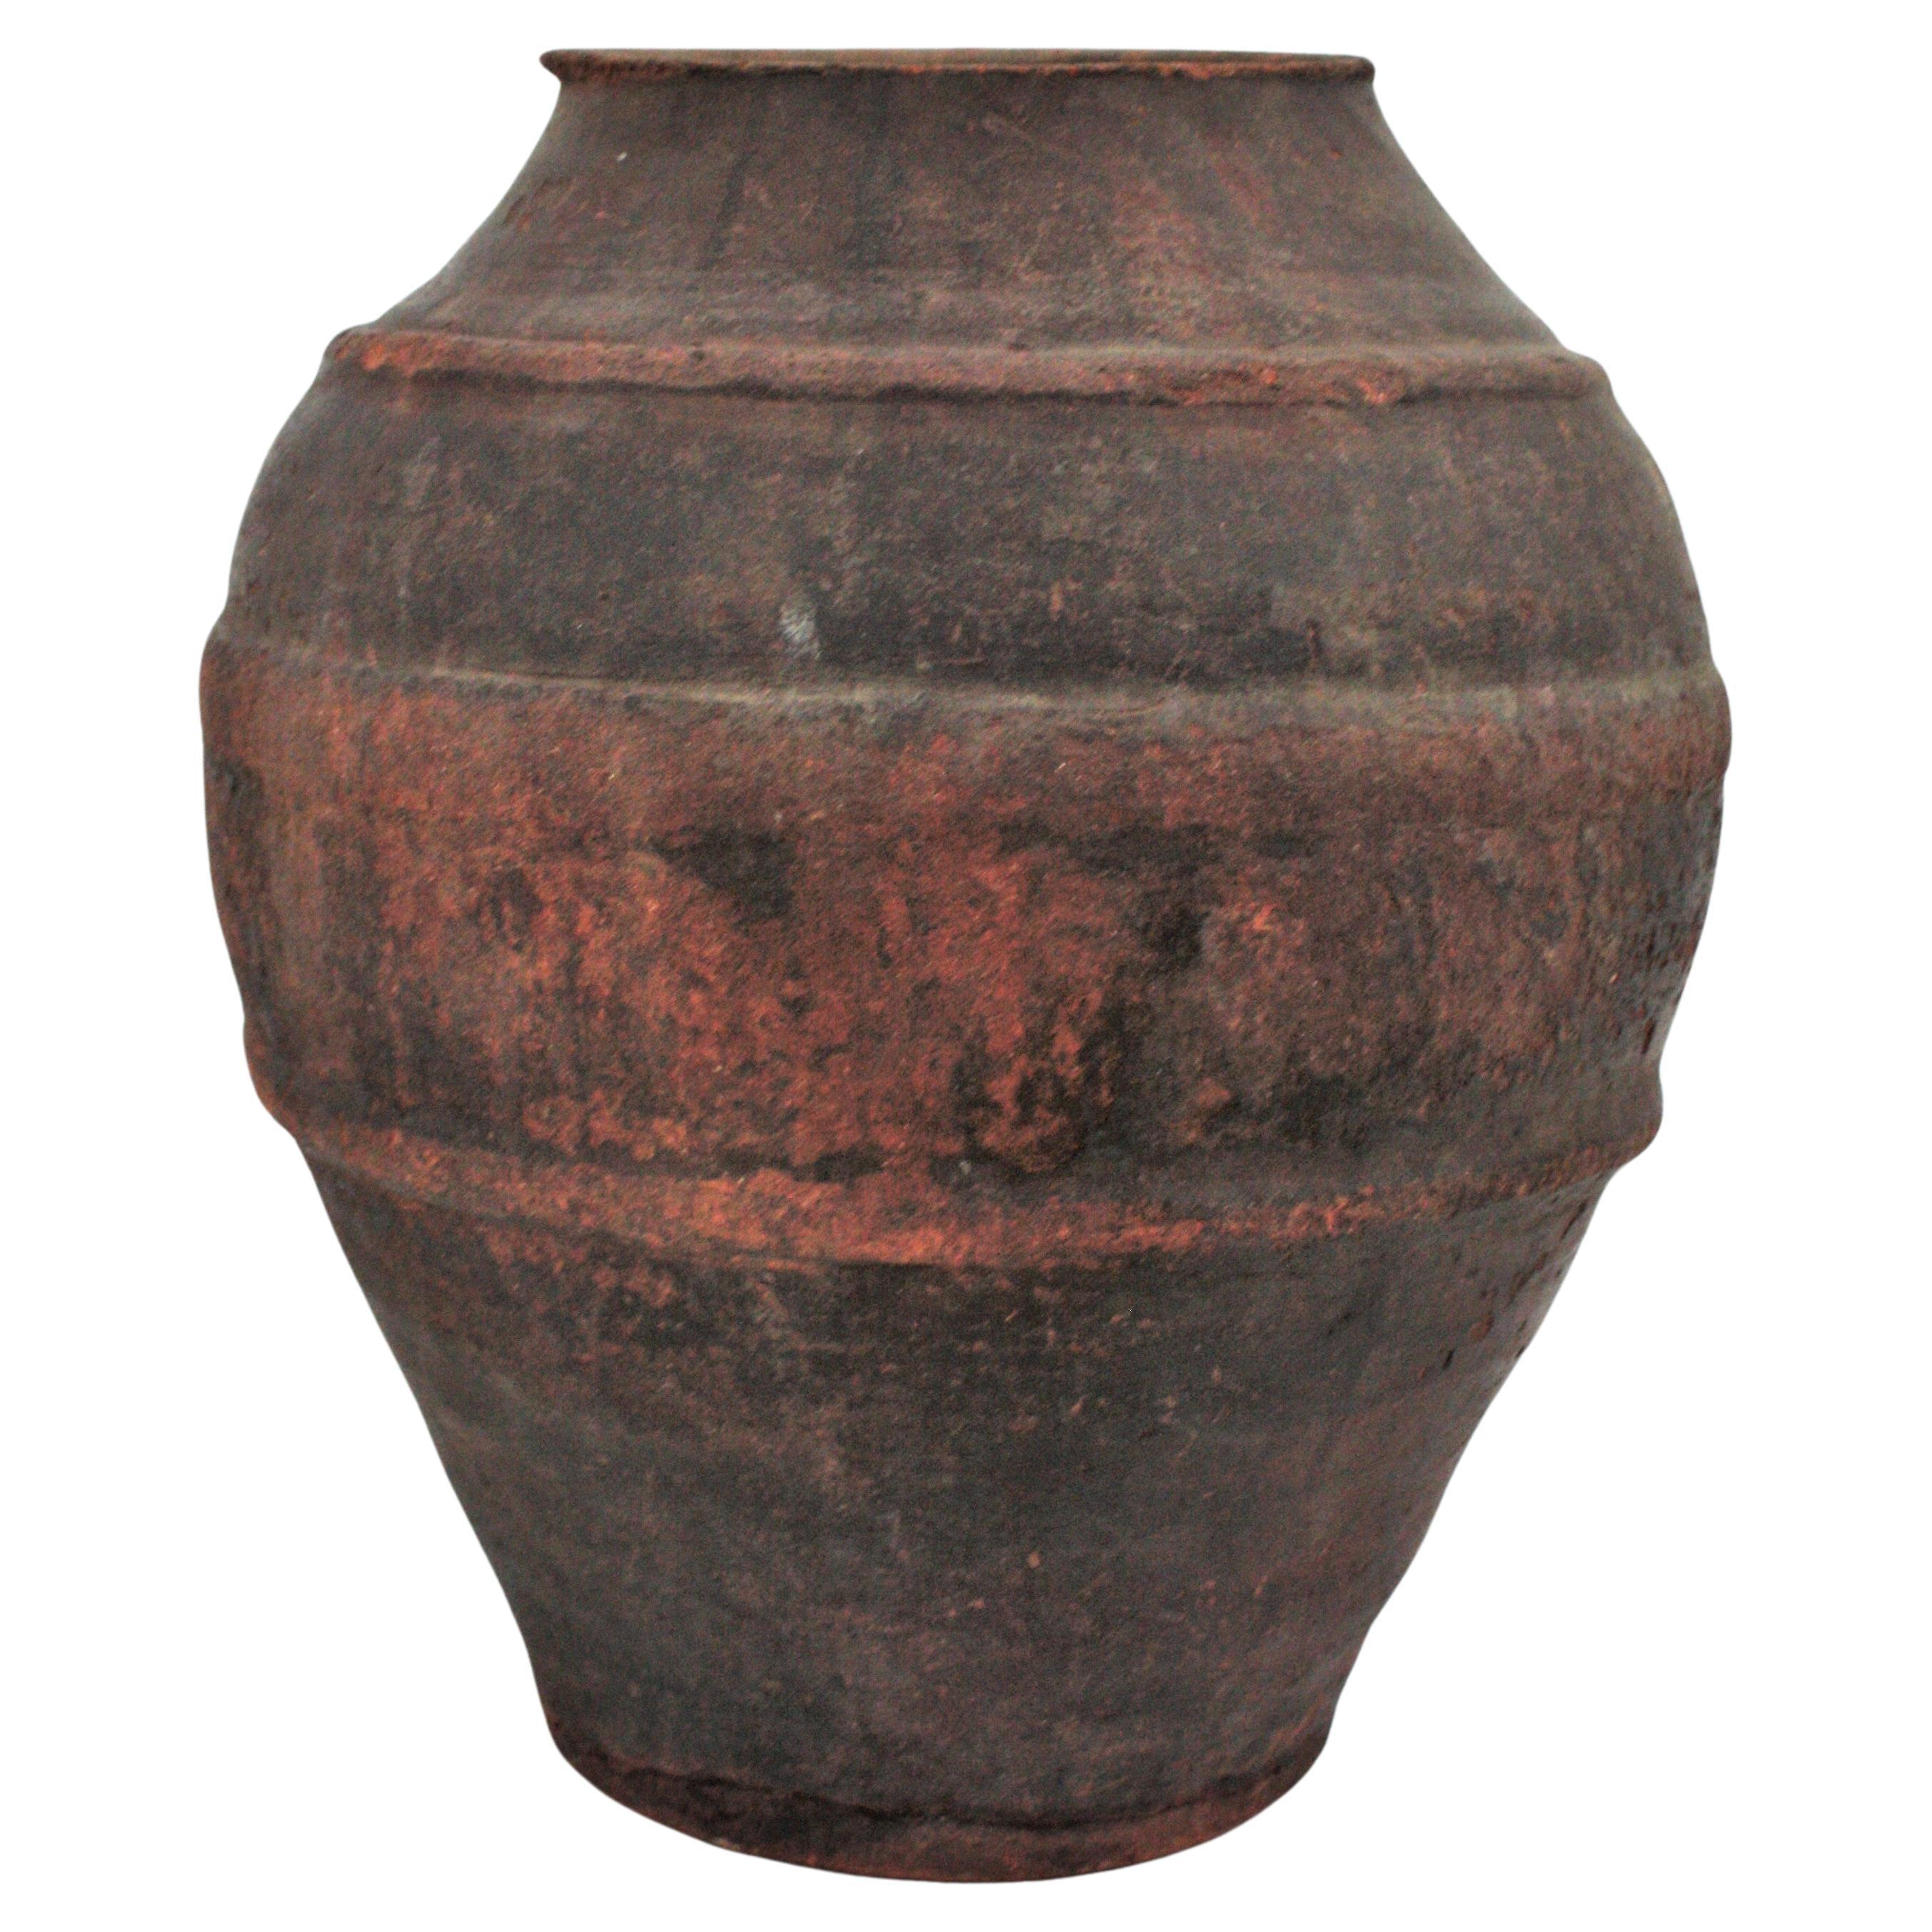 Antique Handmade Unglazed Terracota Olive Jar or Vessel, Spain, 19th century- 1930s
This eye-catching dark terracota jar or urn was designed to contain water and to keep it fresh. It has distinctive decorative bands and a terrific aged